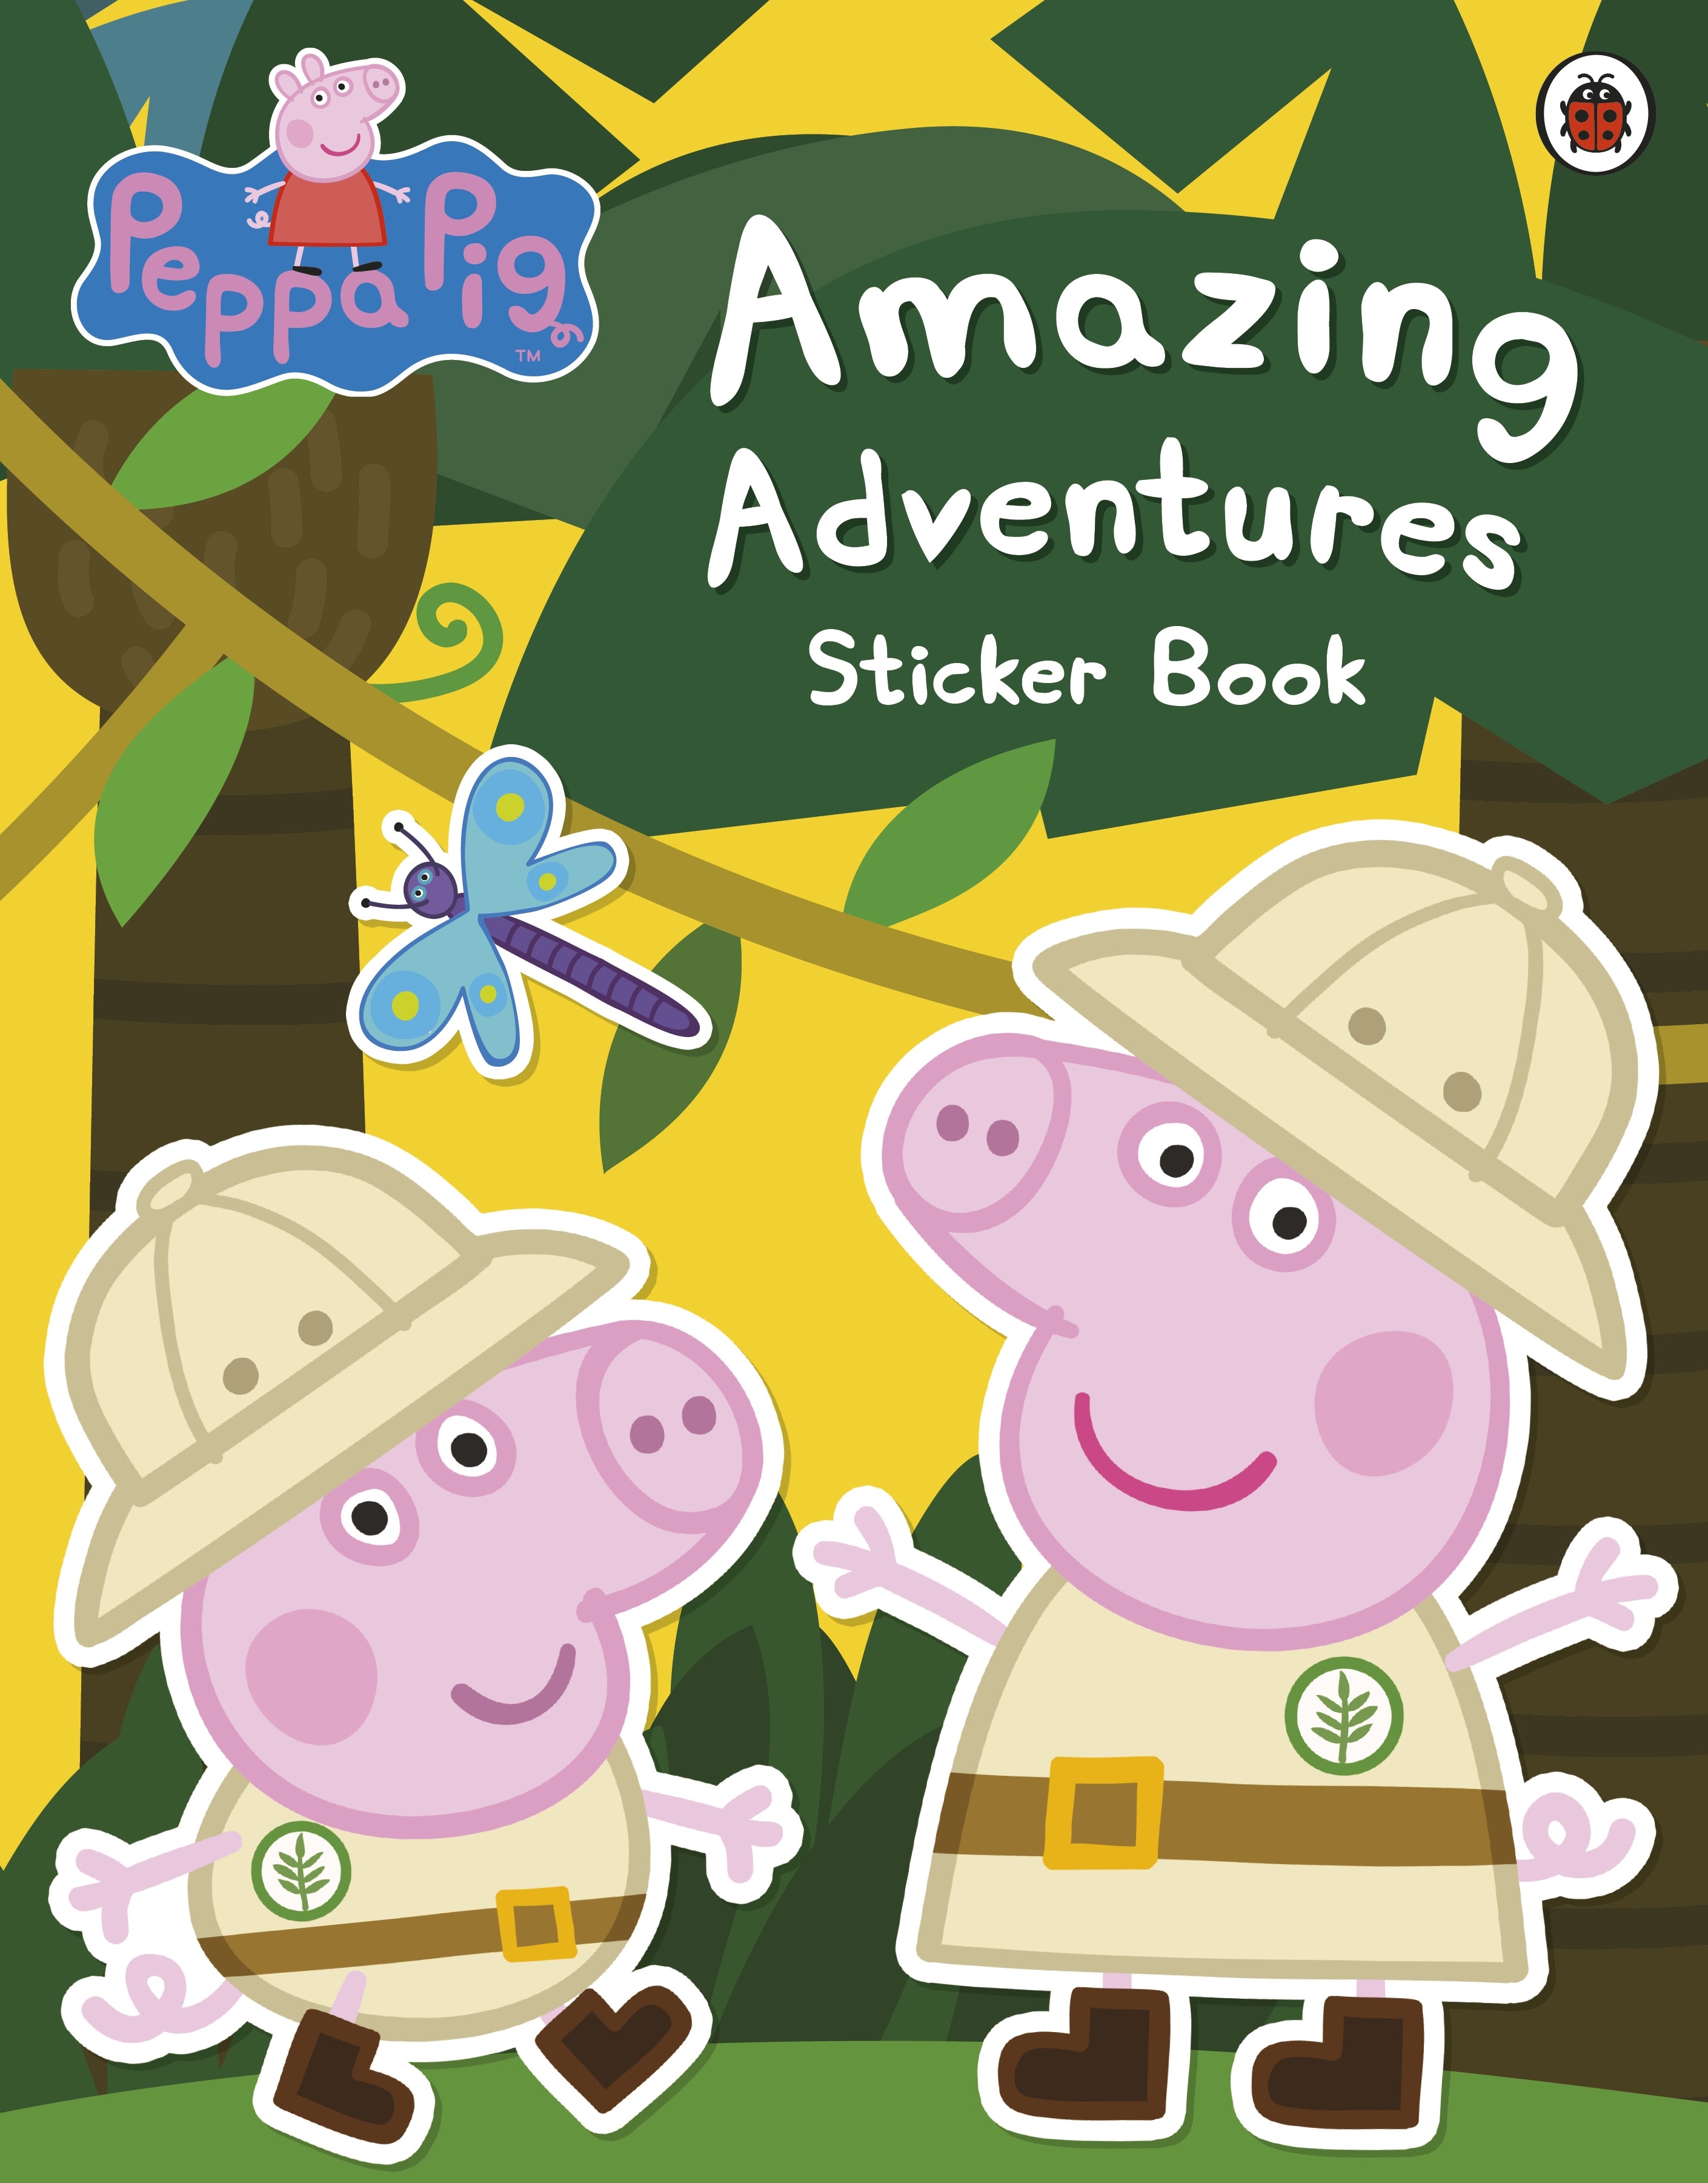 Book “Peppa Pig: Amazing Adventures Sticker Book” by Peppa Pig — January 5, 2012